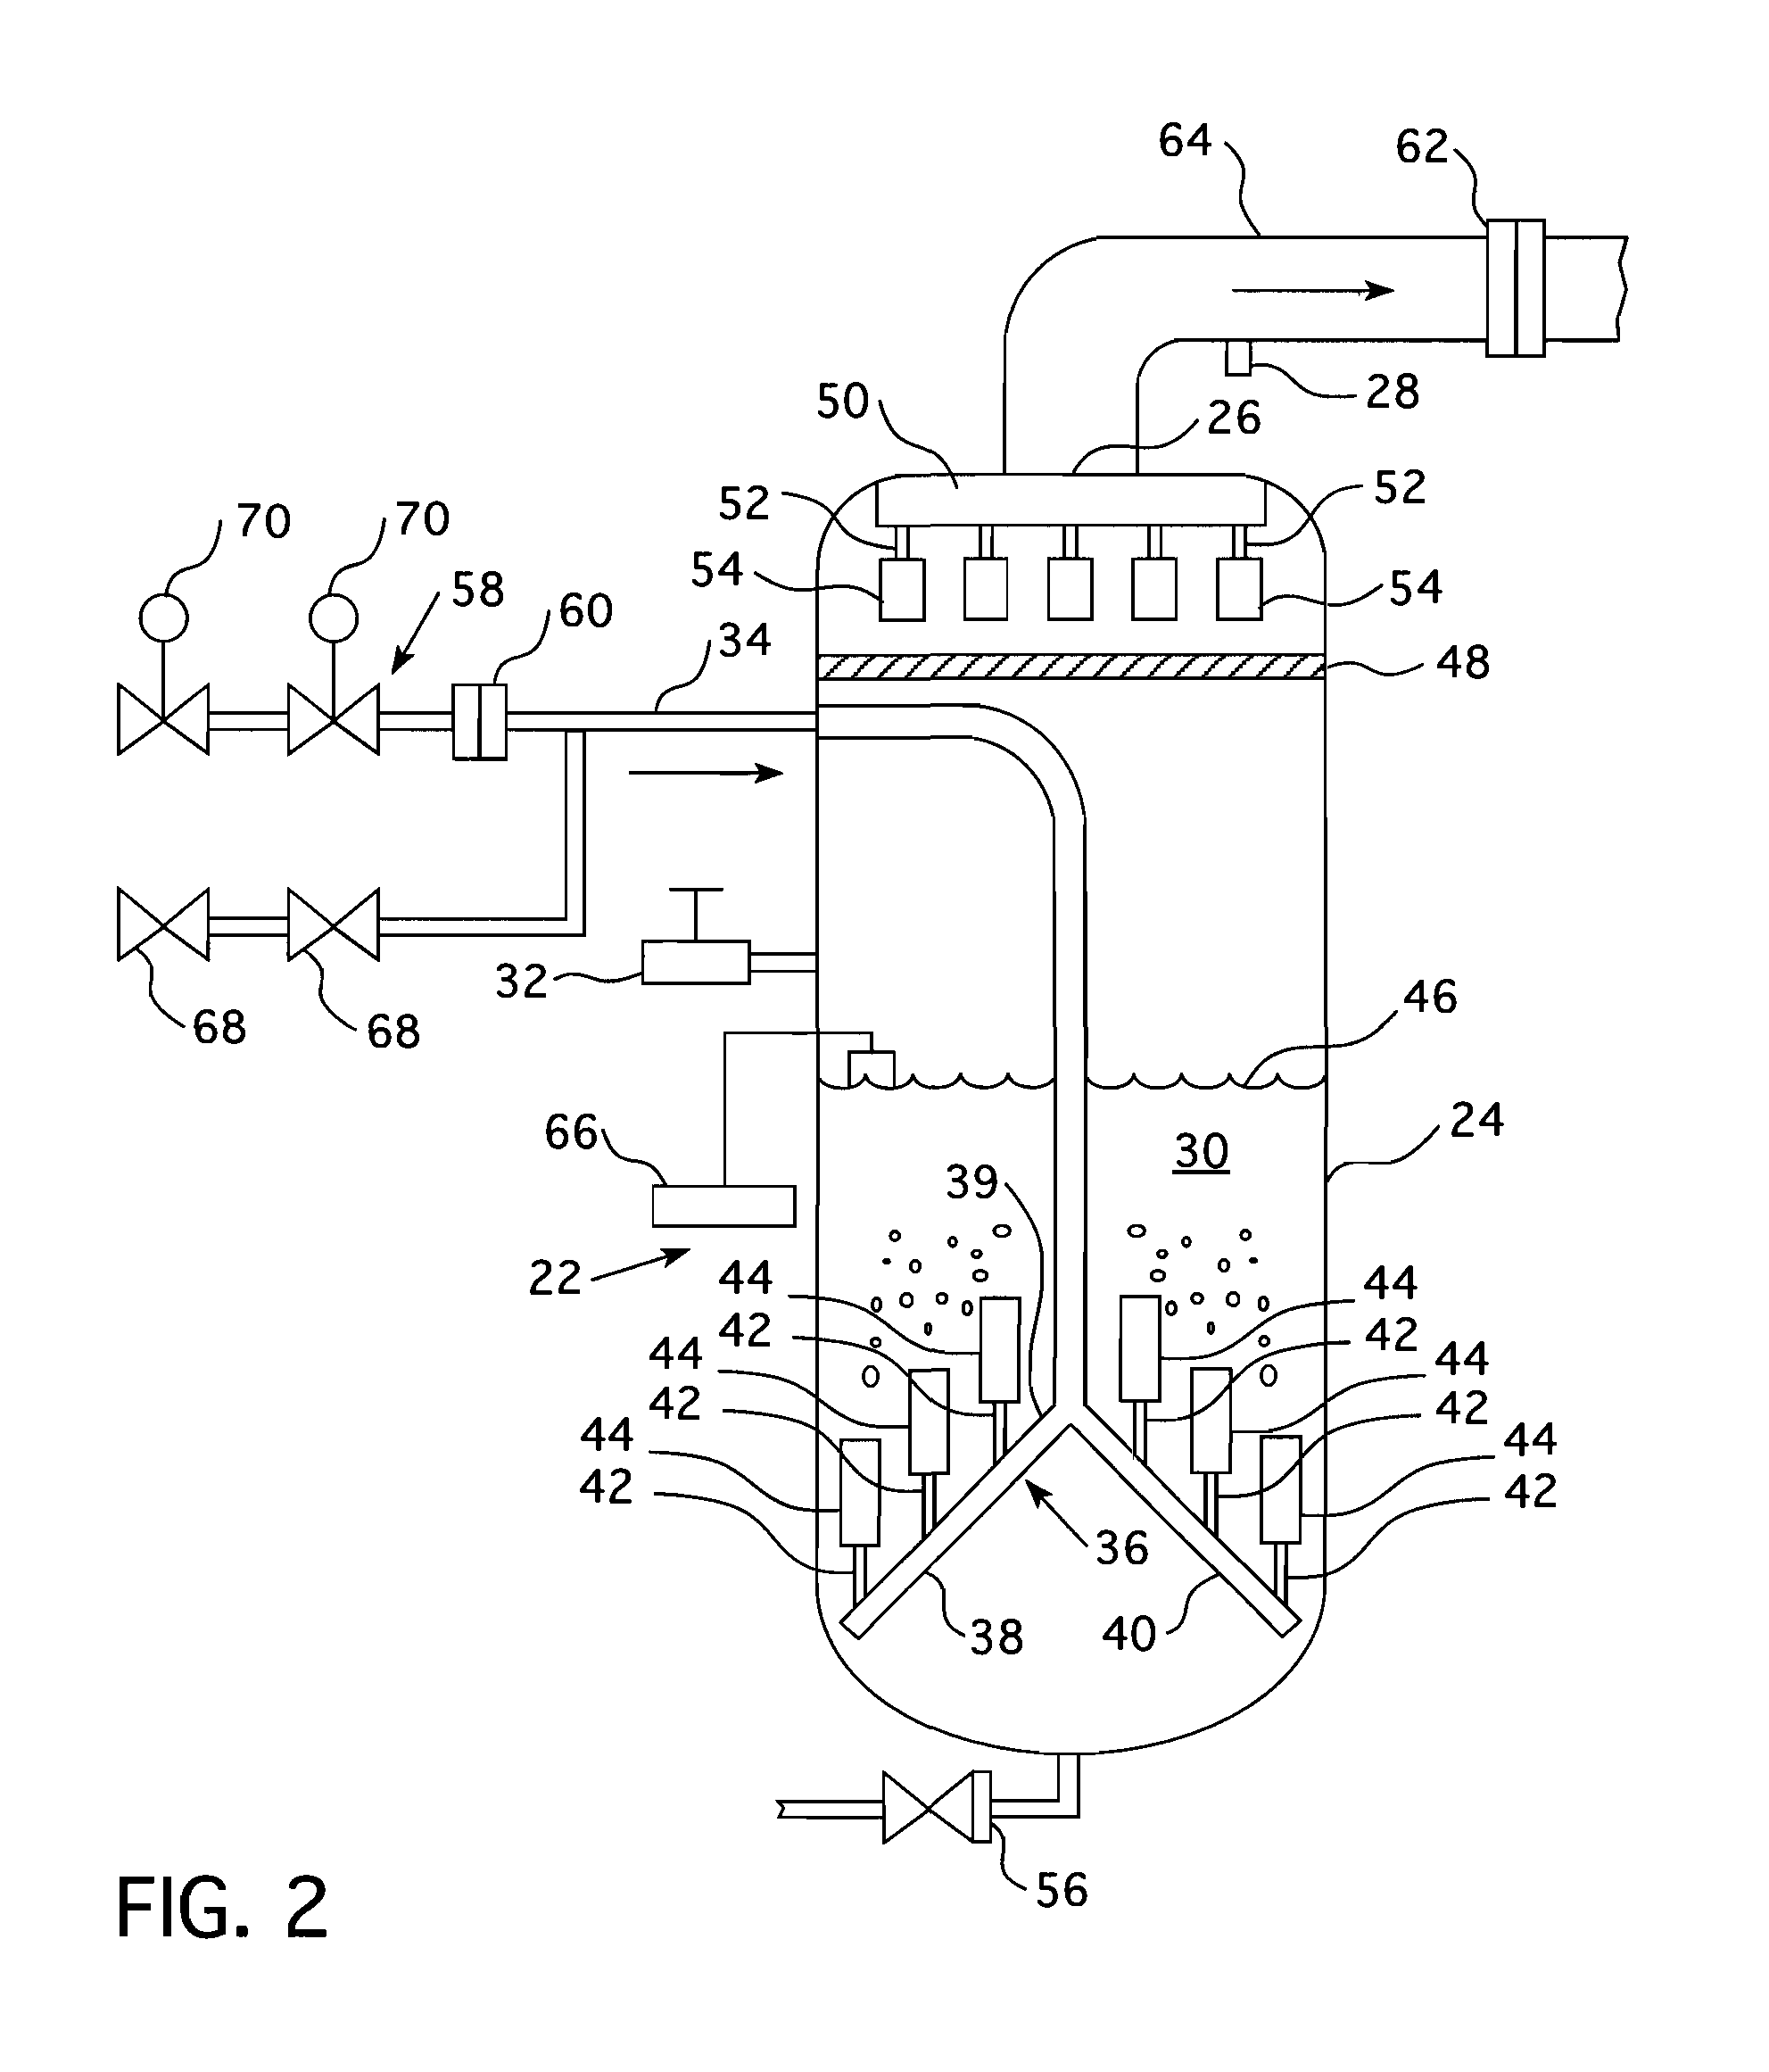 Filter for a nuclear reactor containment ventilation system